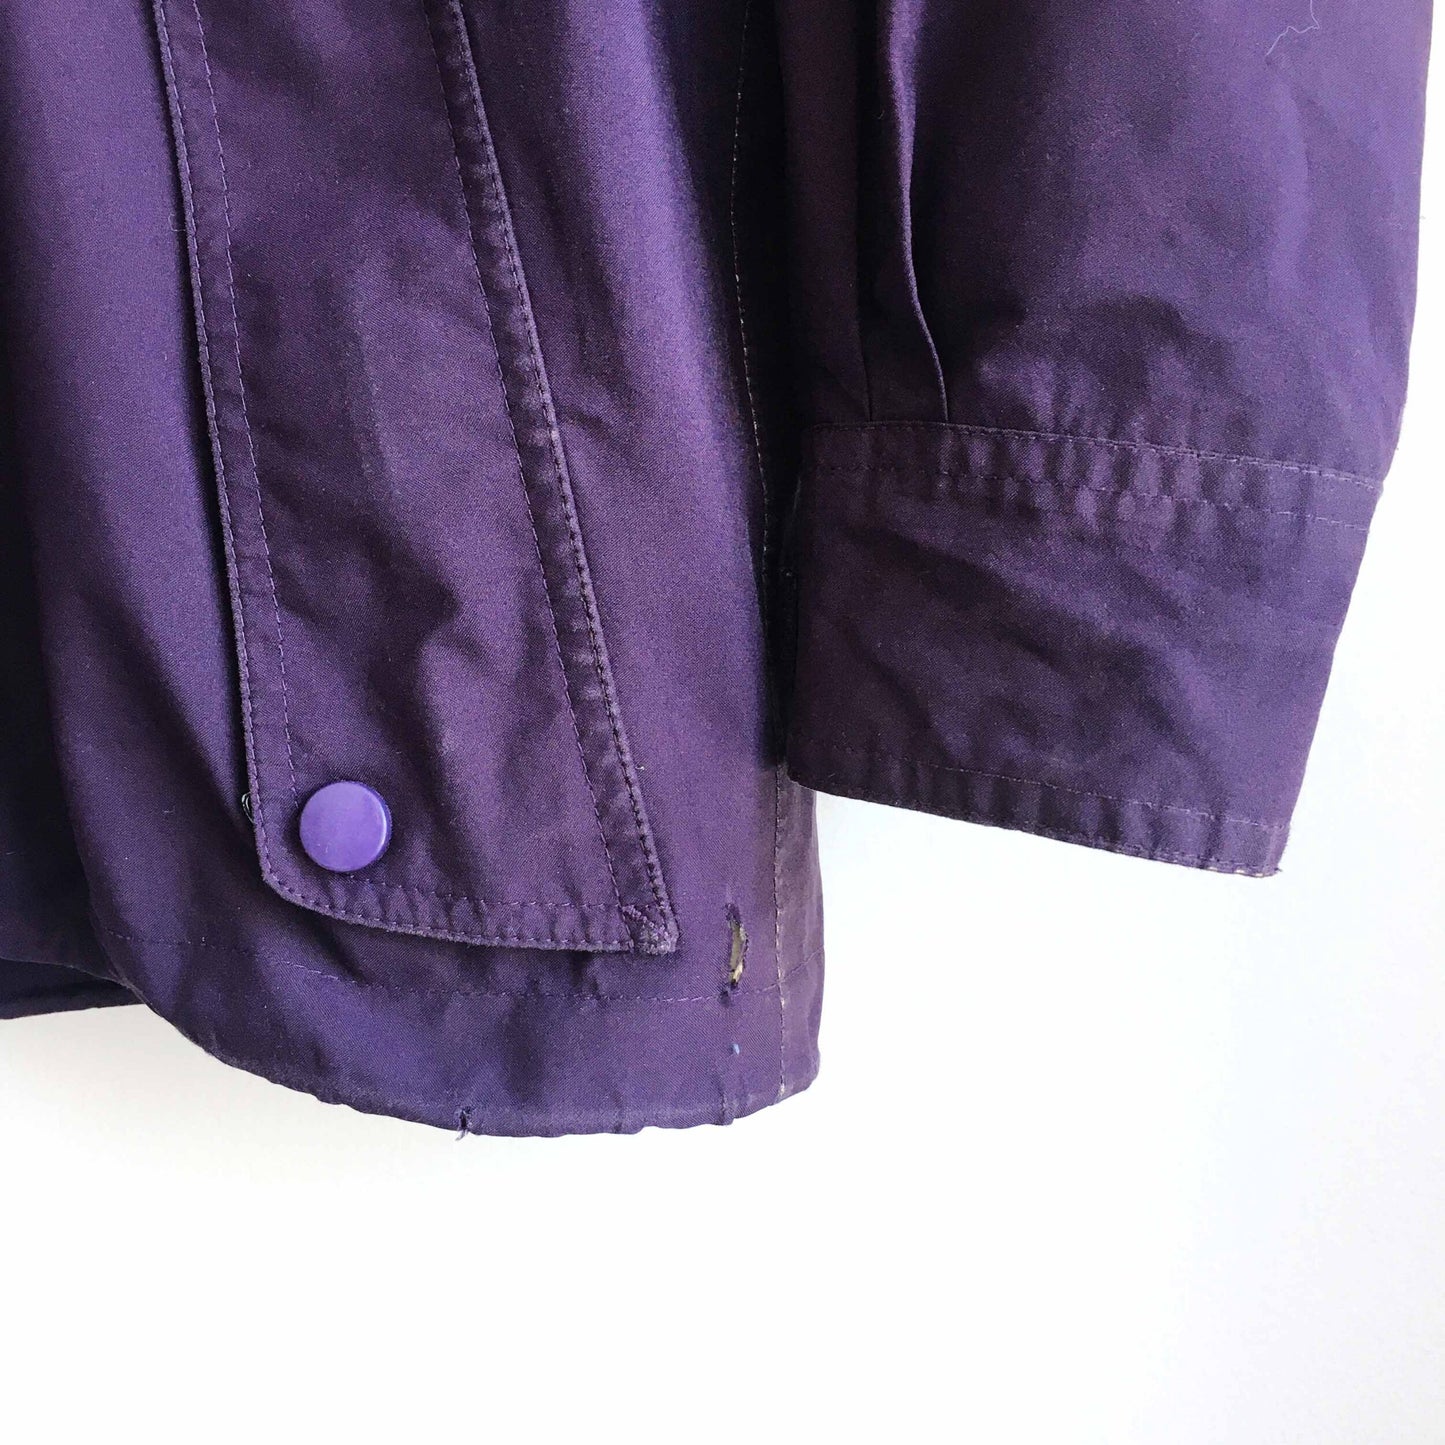 Vintage MEC Drawstring All-weather Jacket - size Small